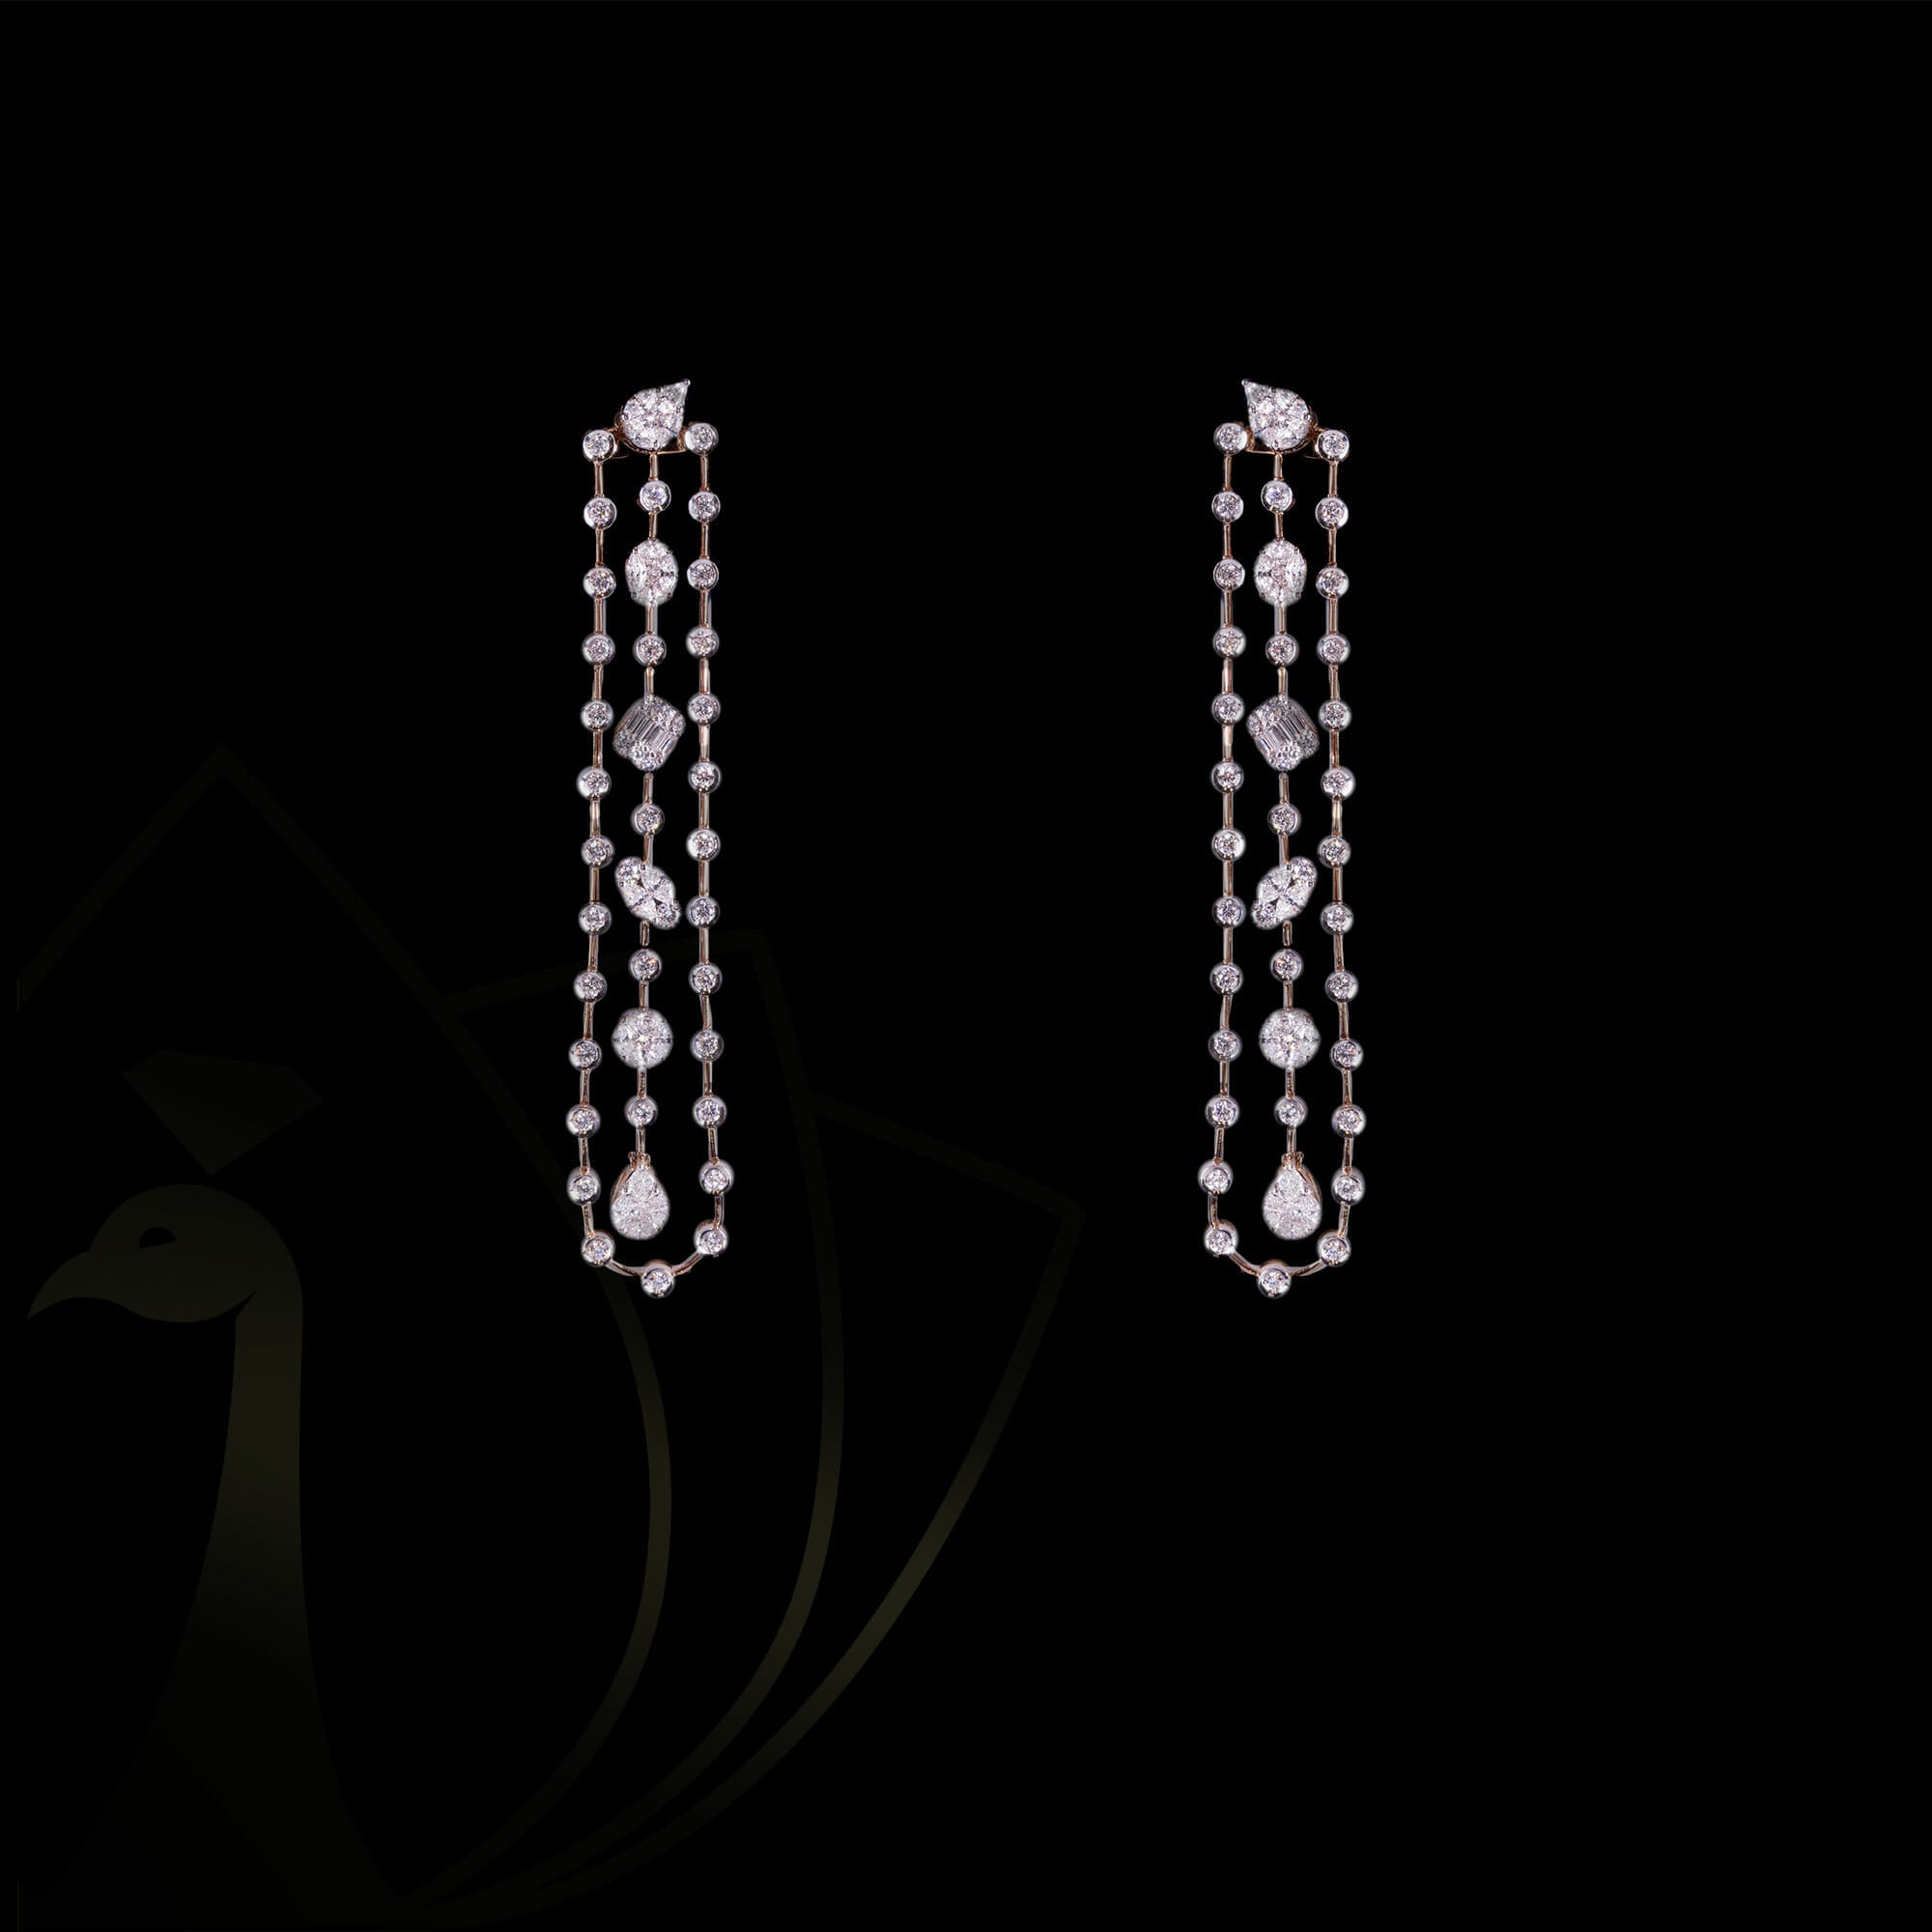 Classic Symphony Diamond Chandelier Earrings from our exclusive Gulz Collection